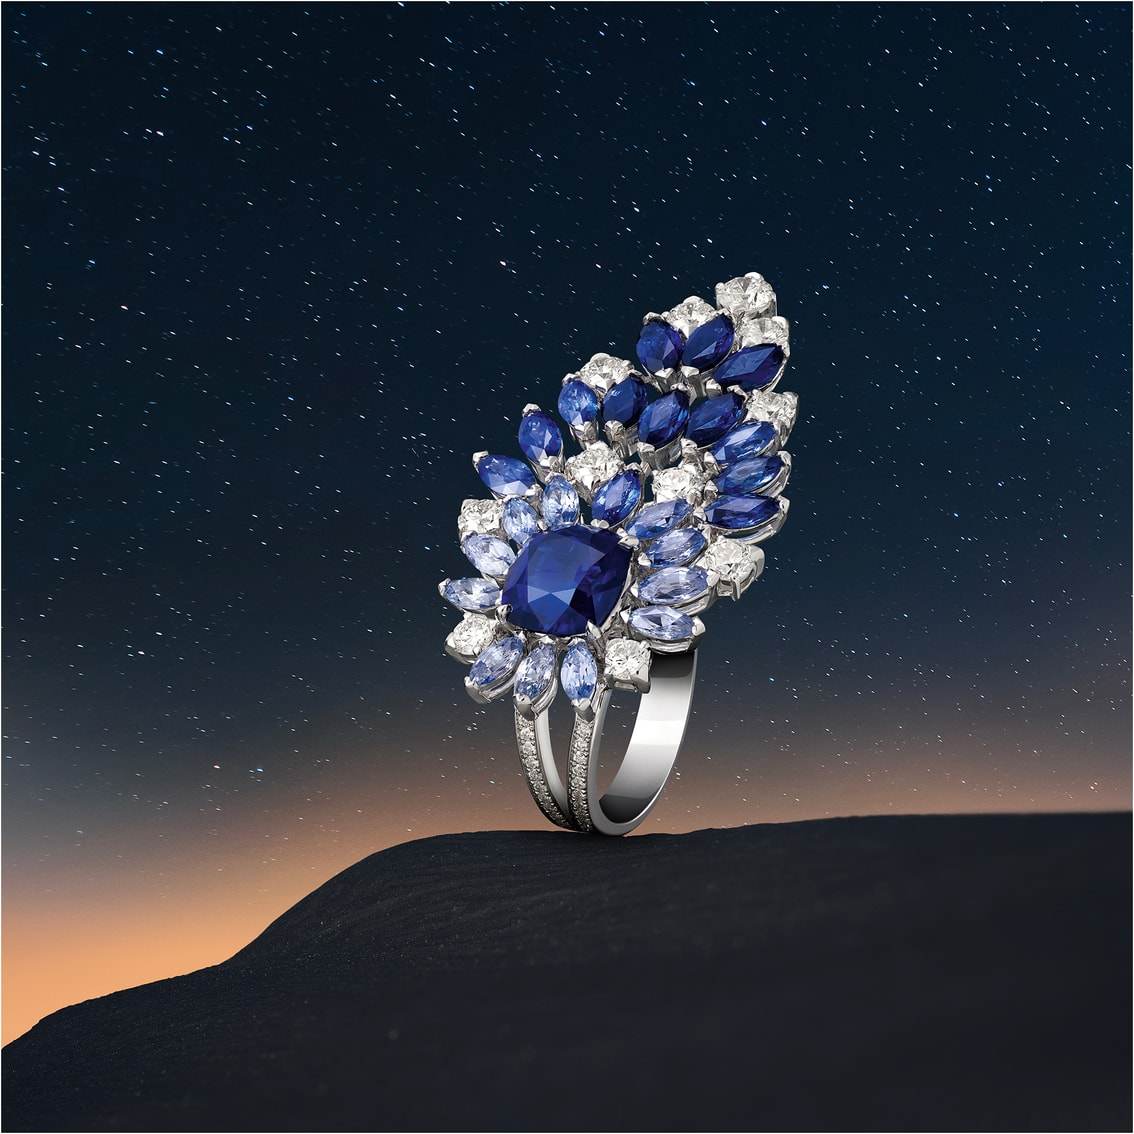 Five high jewellery pieces, including Piaget’s Infinite Lights ring, that showcase large sapphires. Photo: Piaget